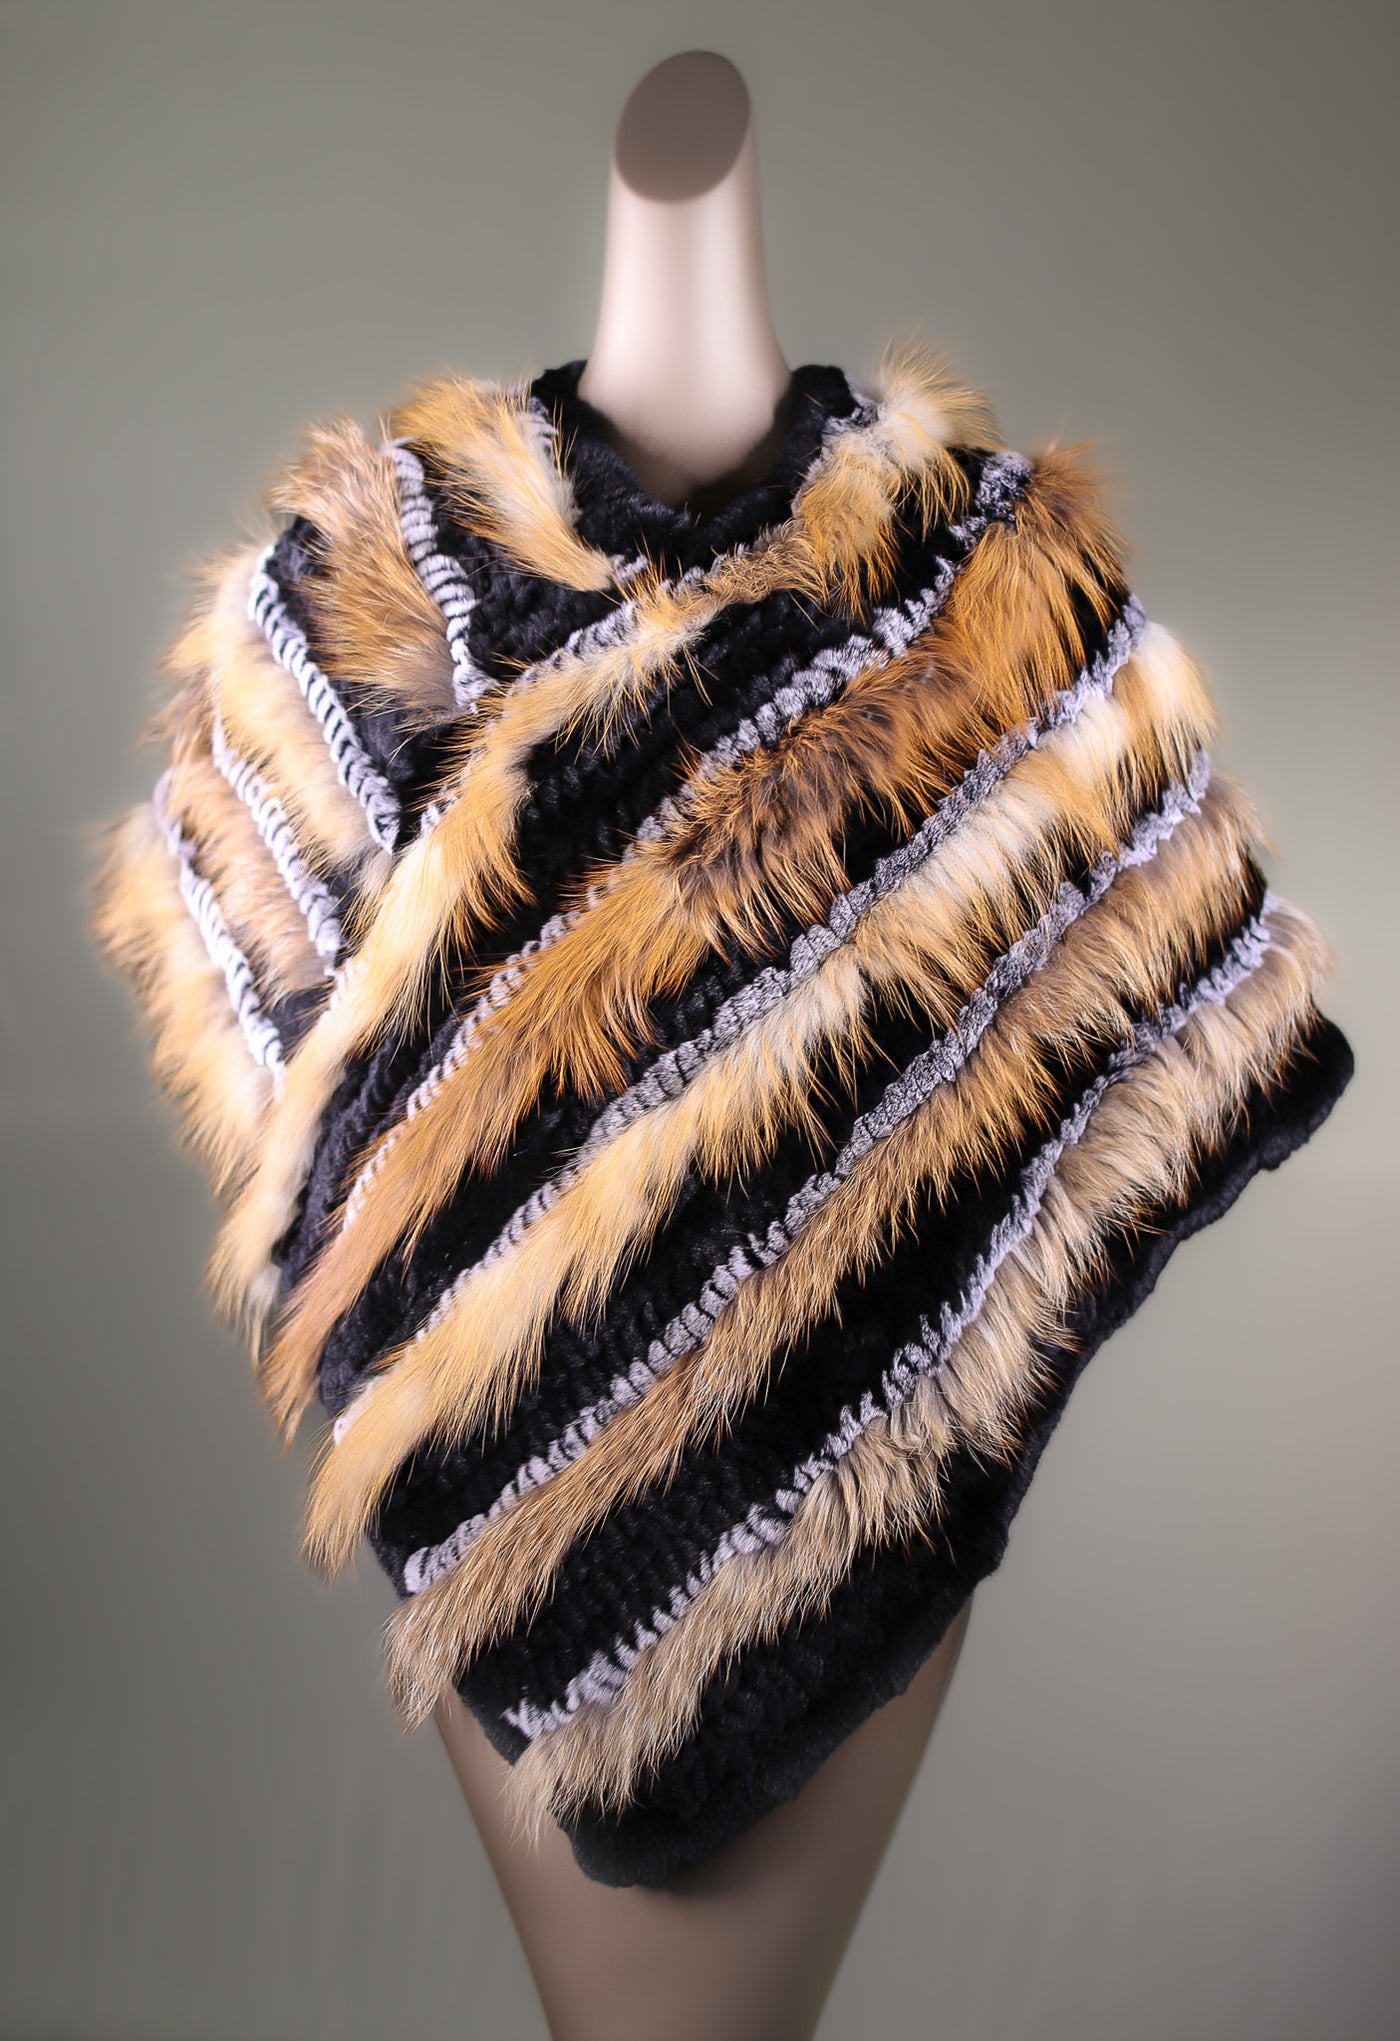 Knitted Contrasting Chinchilla Rex Poncho with Fox Stripes